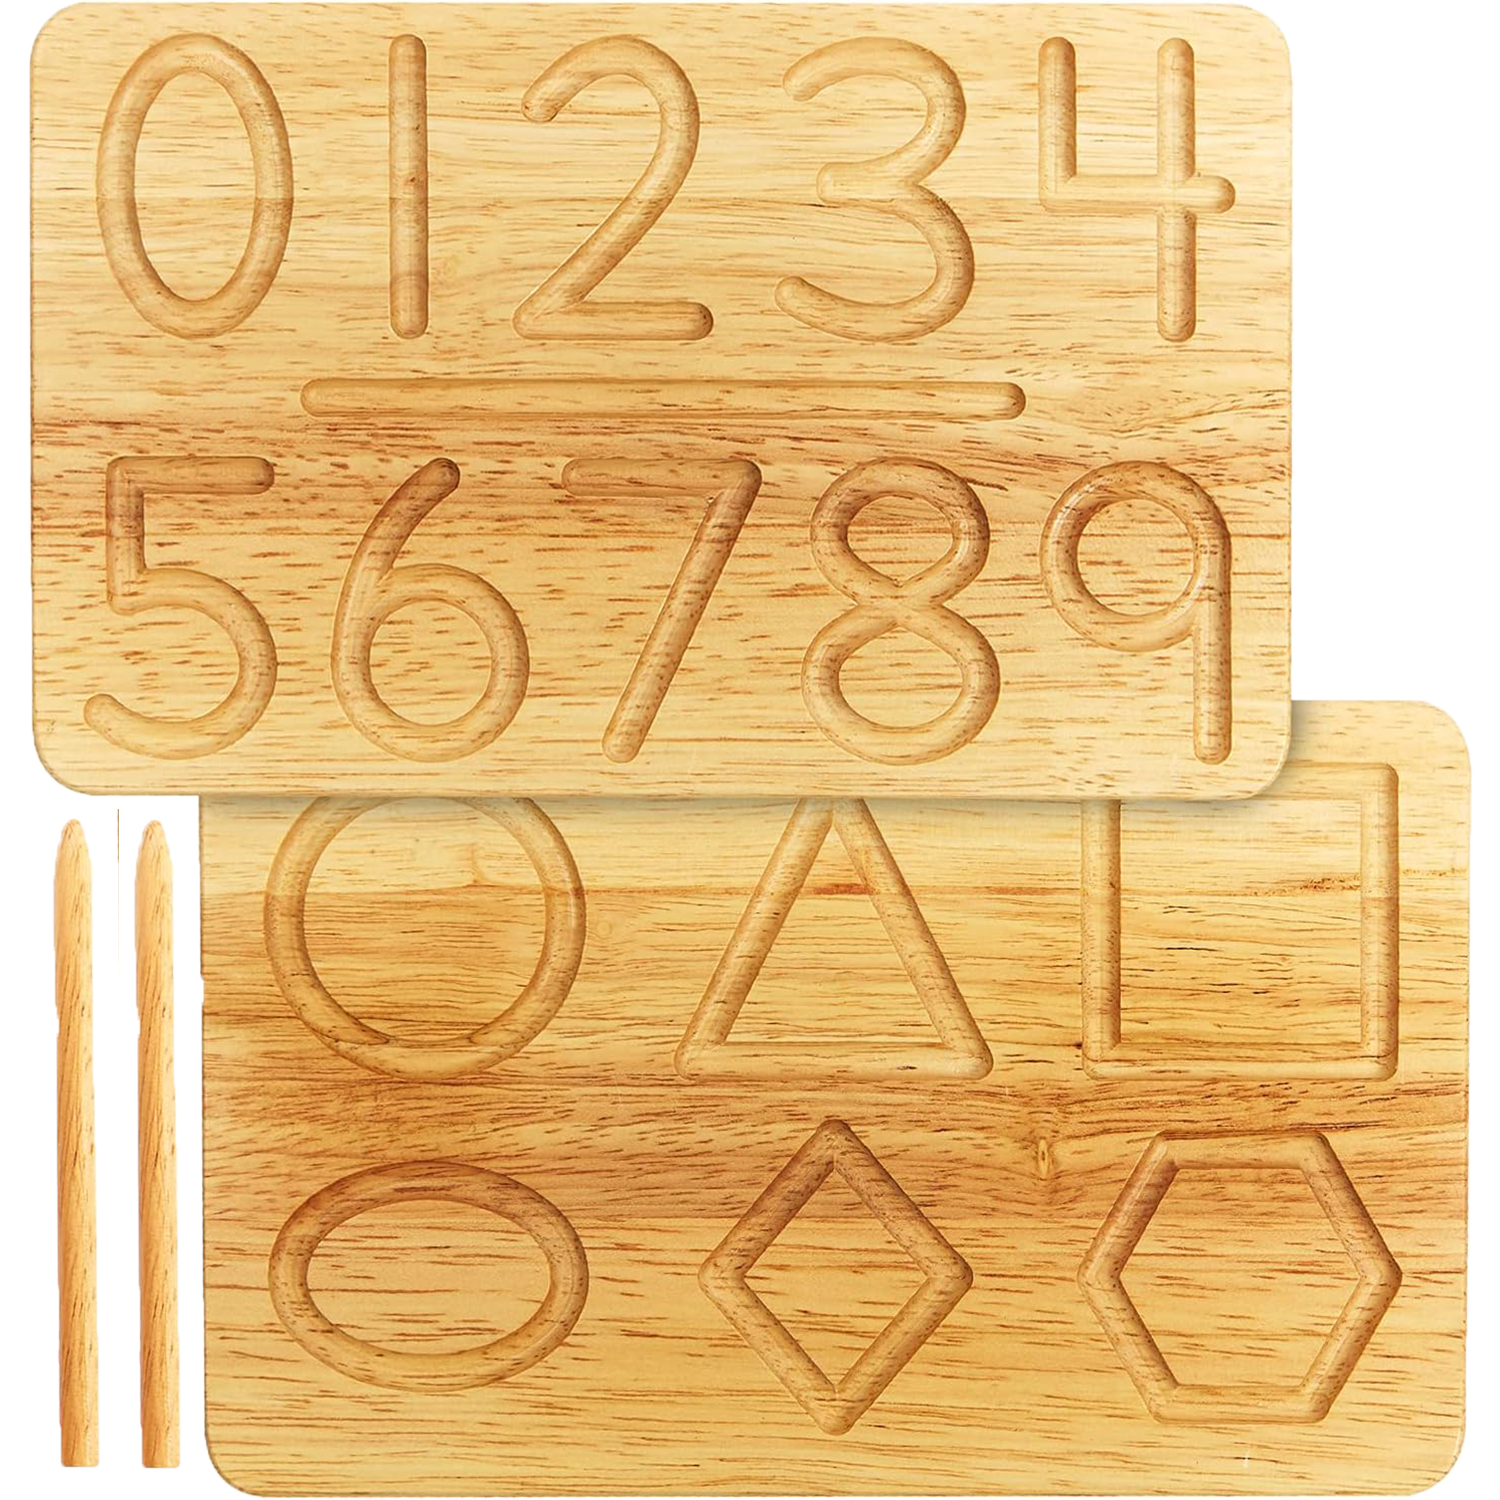 Heirloom Quality Double Sided Wooden Numbers and Shapes Tracing Board.  Montessori inspired wood numerals, geometry and math tracing board